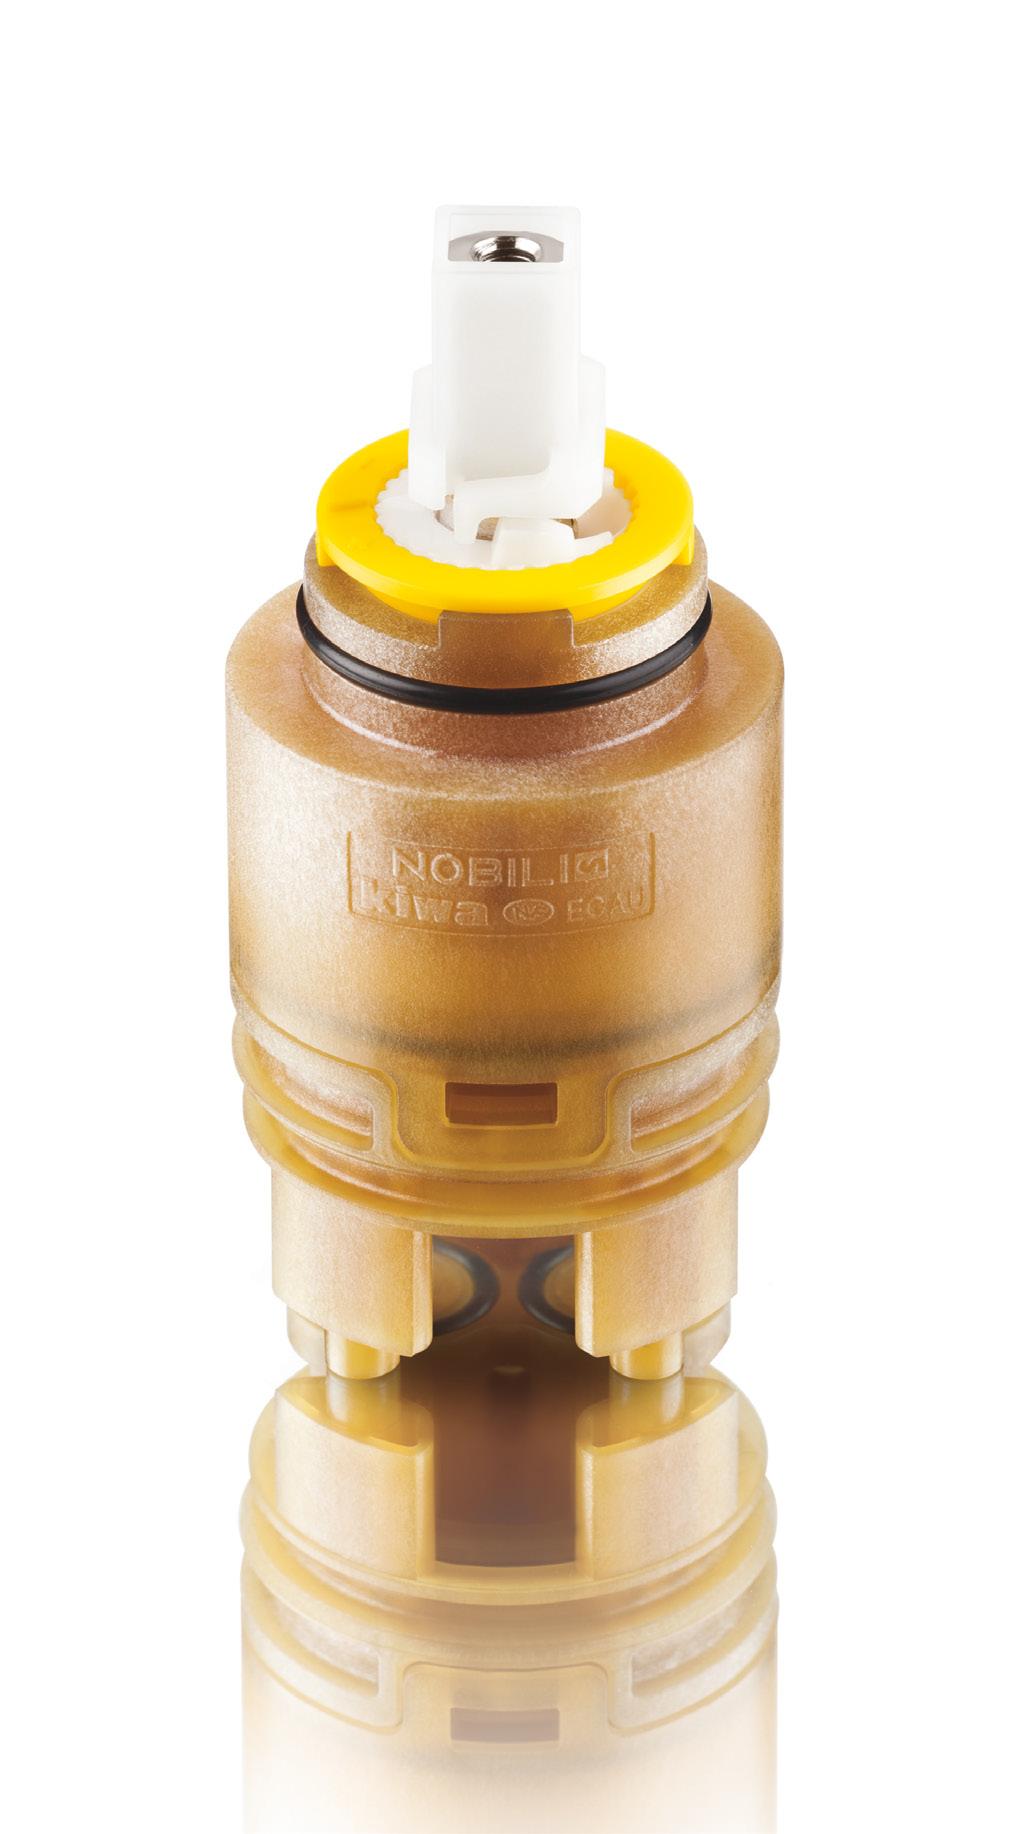 THE HEART OF THE NOBI MIXER The Nobili Widd 35 Eco immersion cartridge, with its mere 35 mm diameter, is devoted to maximum saving and respect for